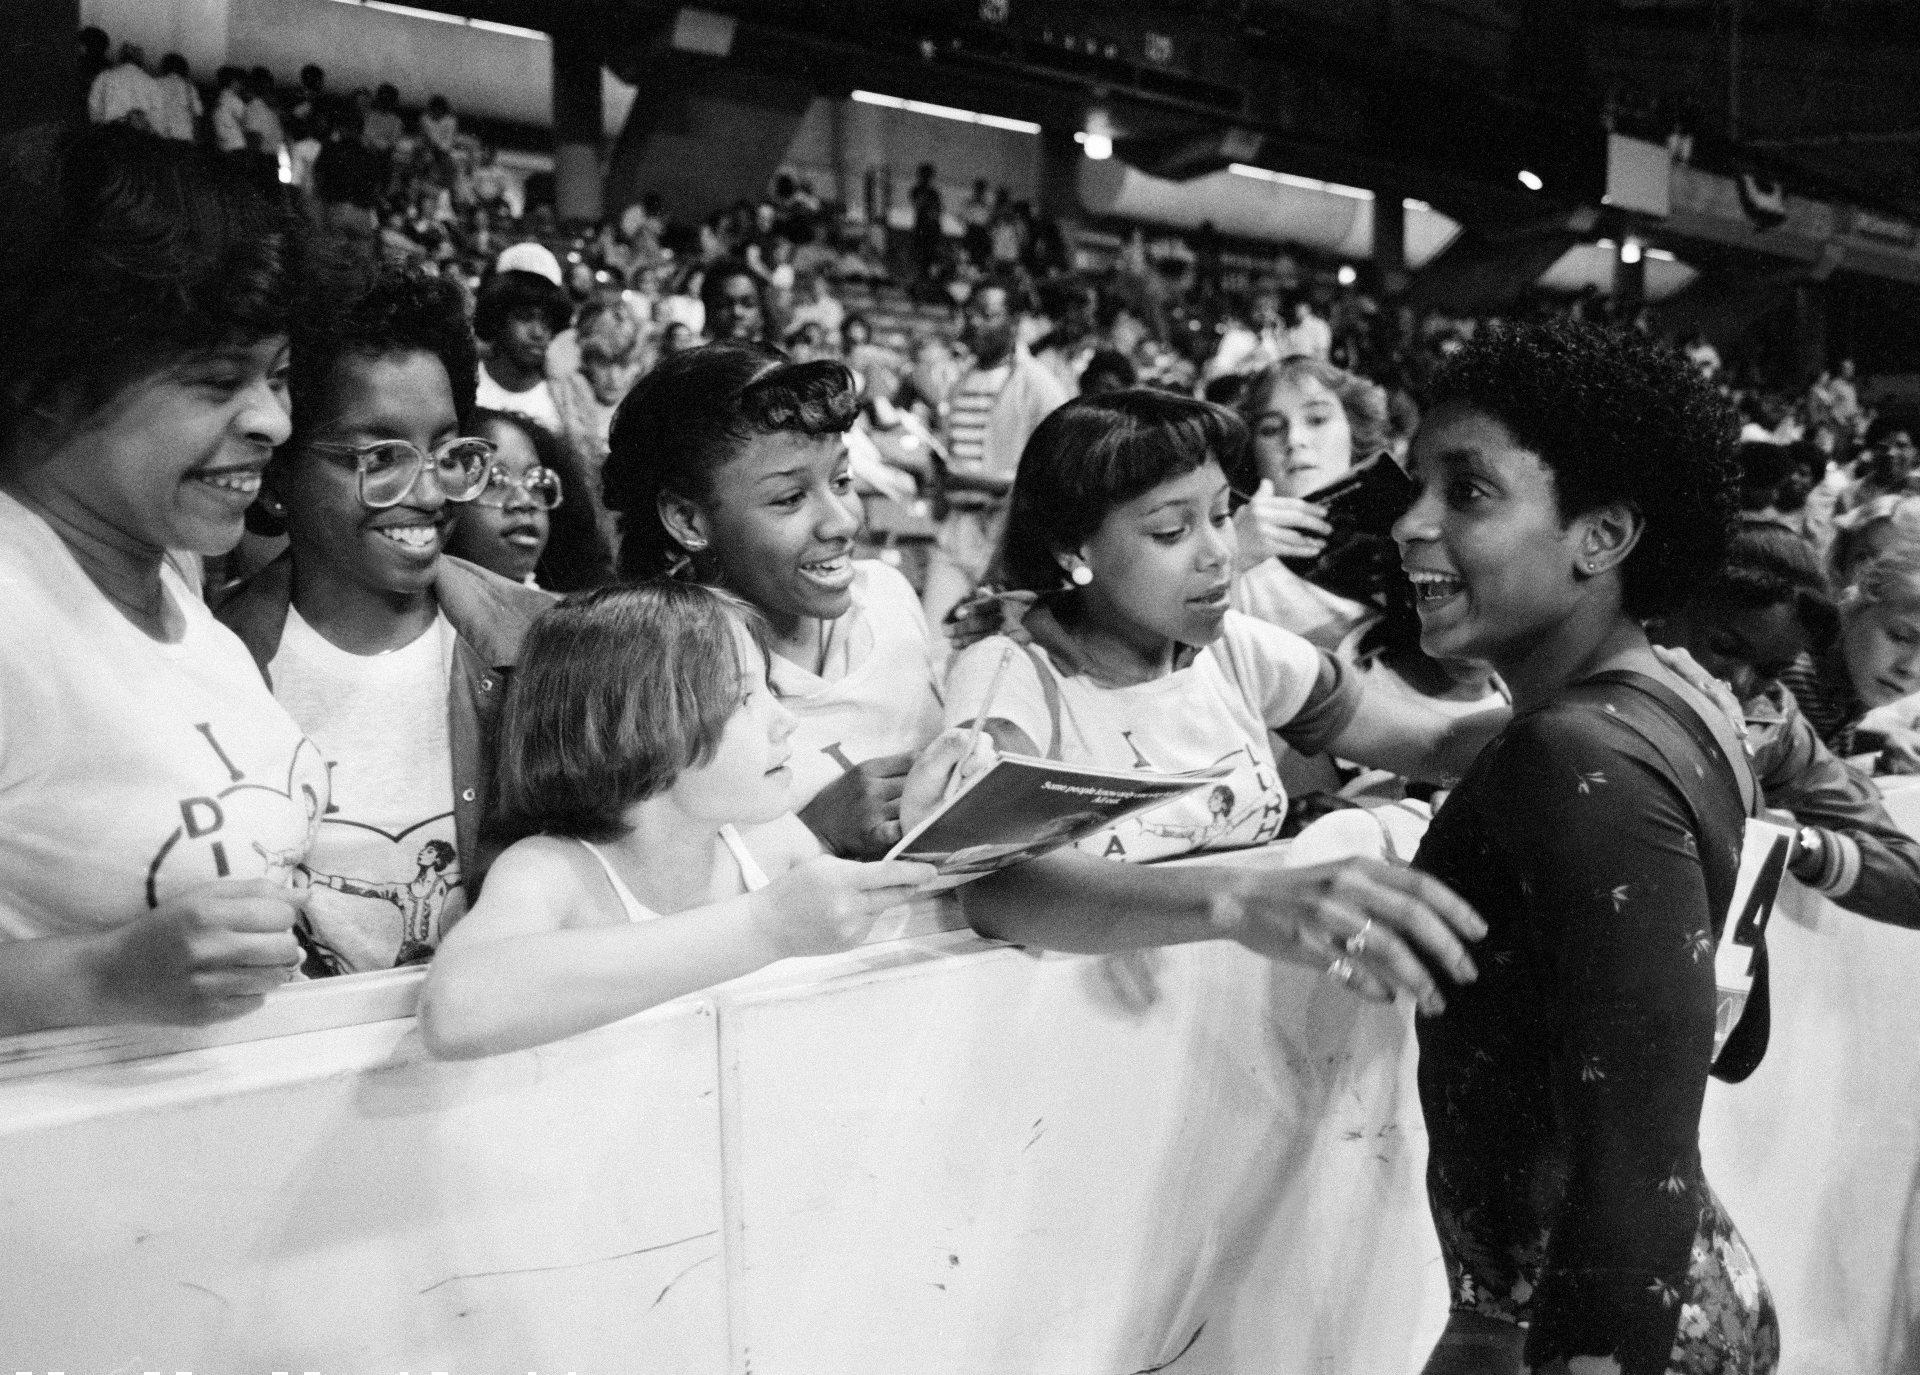 In this June 5, 1983, file photo, Dianne Durham, right, of Gary, Ind., gives autographs after winning the women's title at the McDonald’s U.S.A. Gymnastic Championships at the University of Illinois in Chicago. (AP Photo / Lisa Genesen, File)